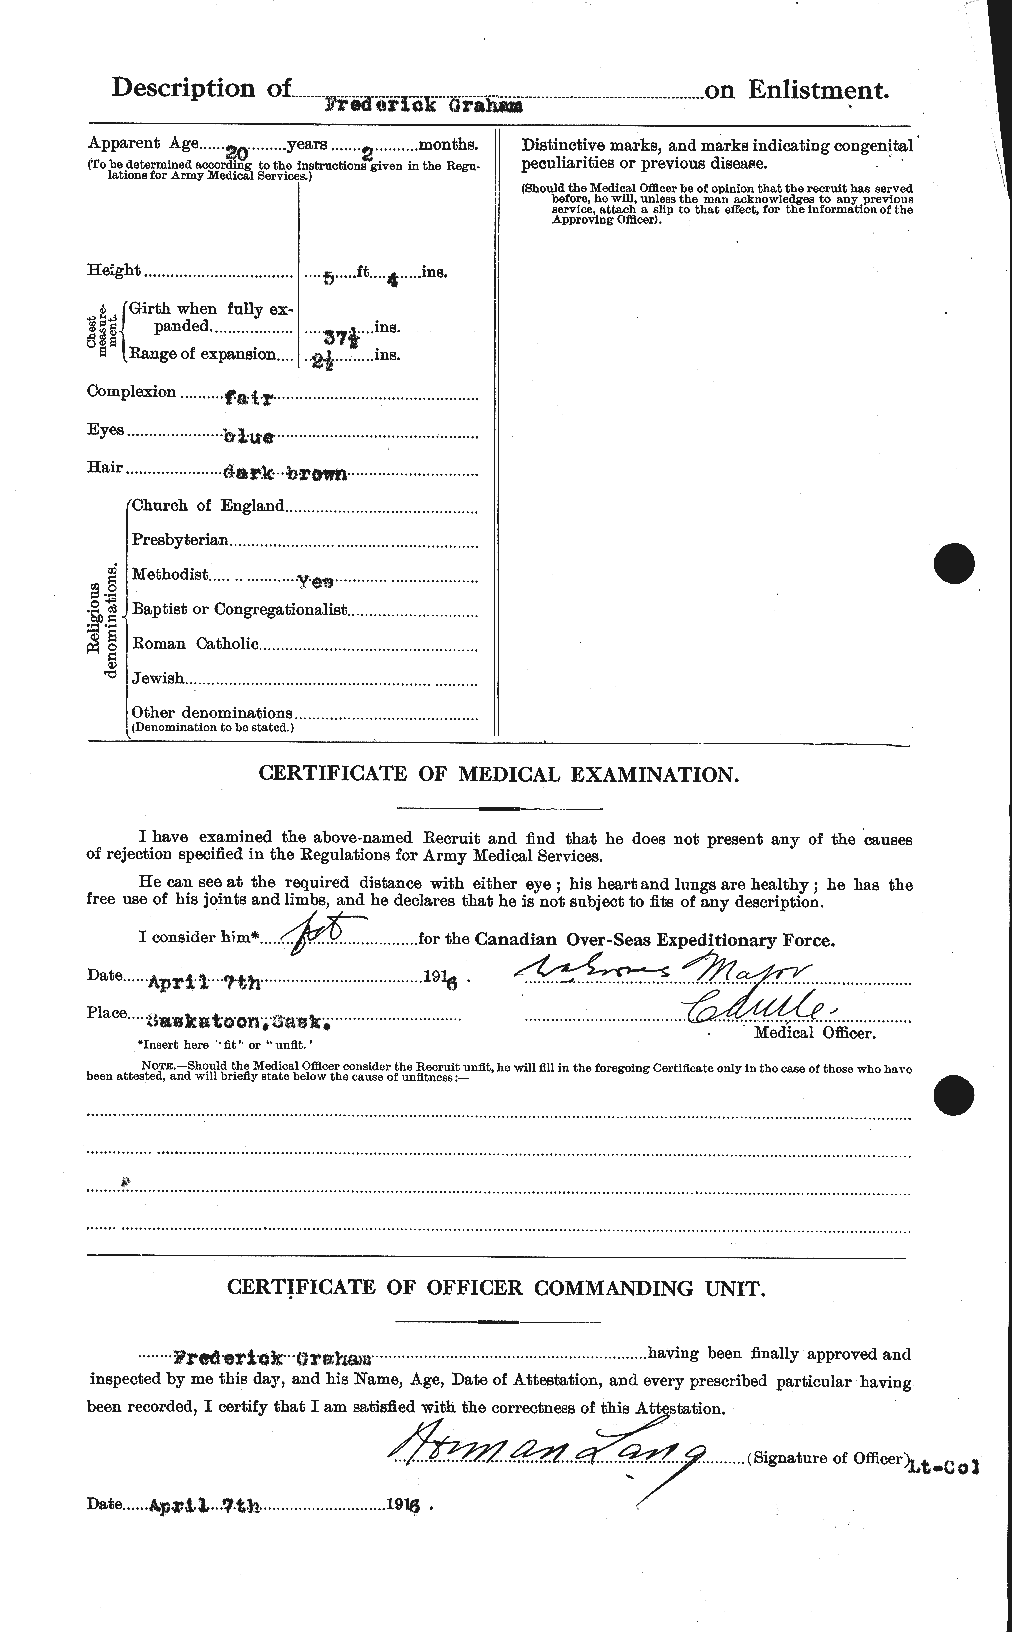 Personnel Records of the First World War - CEF 357604b